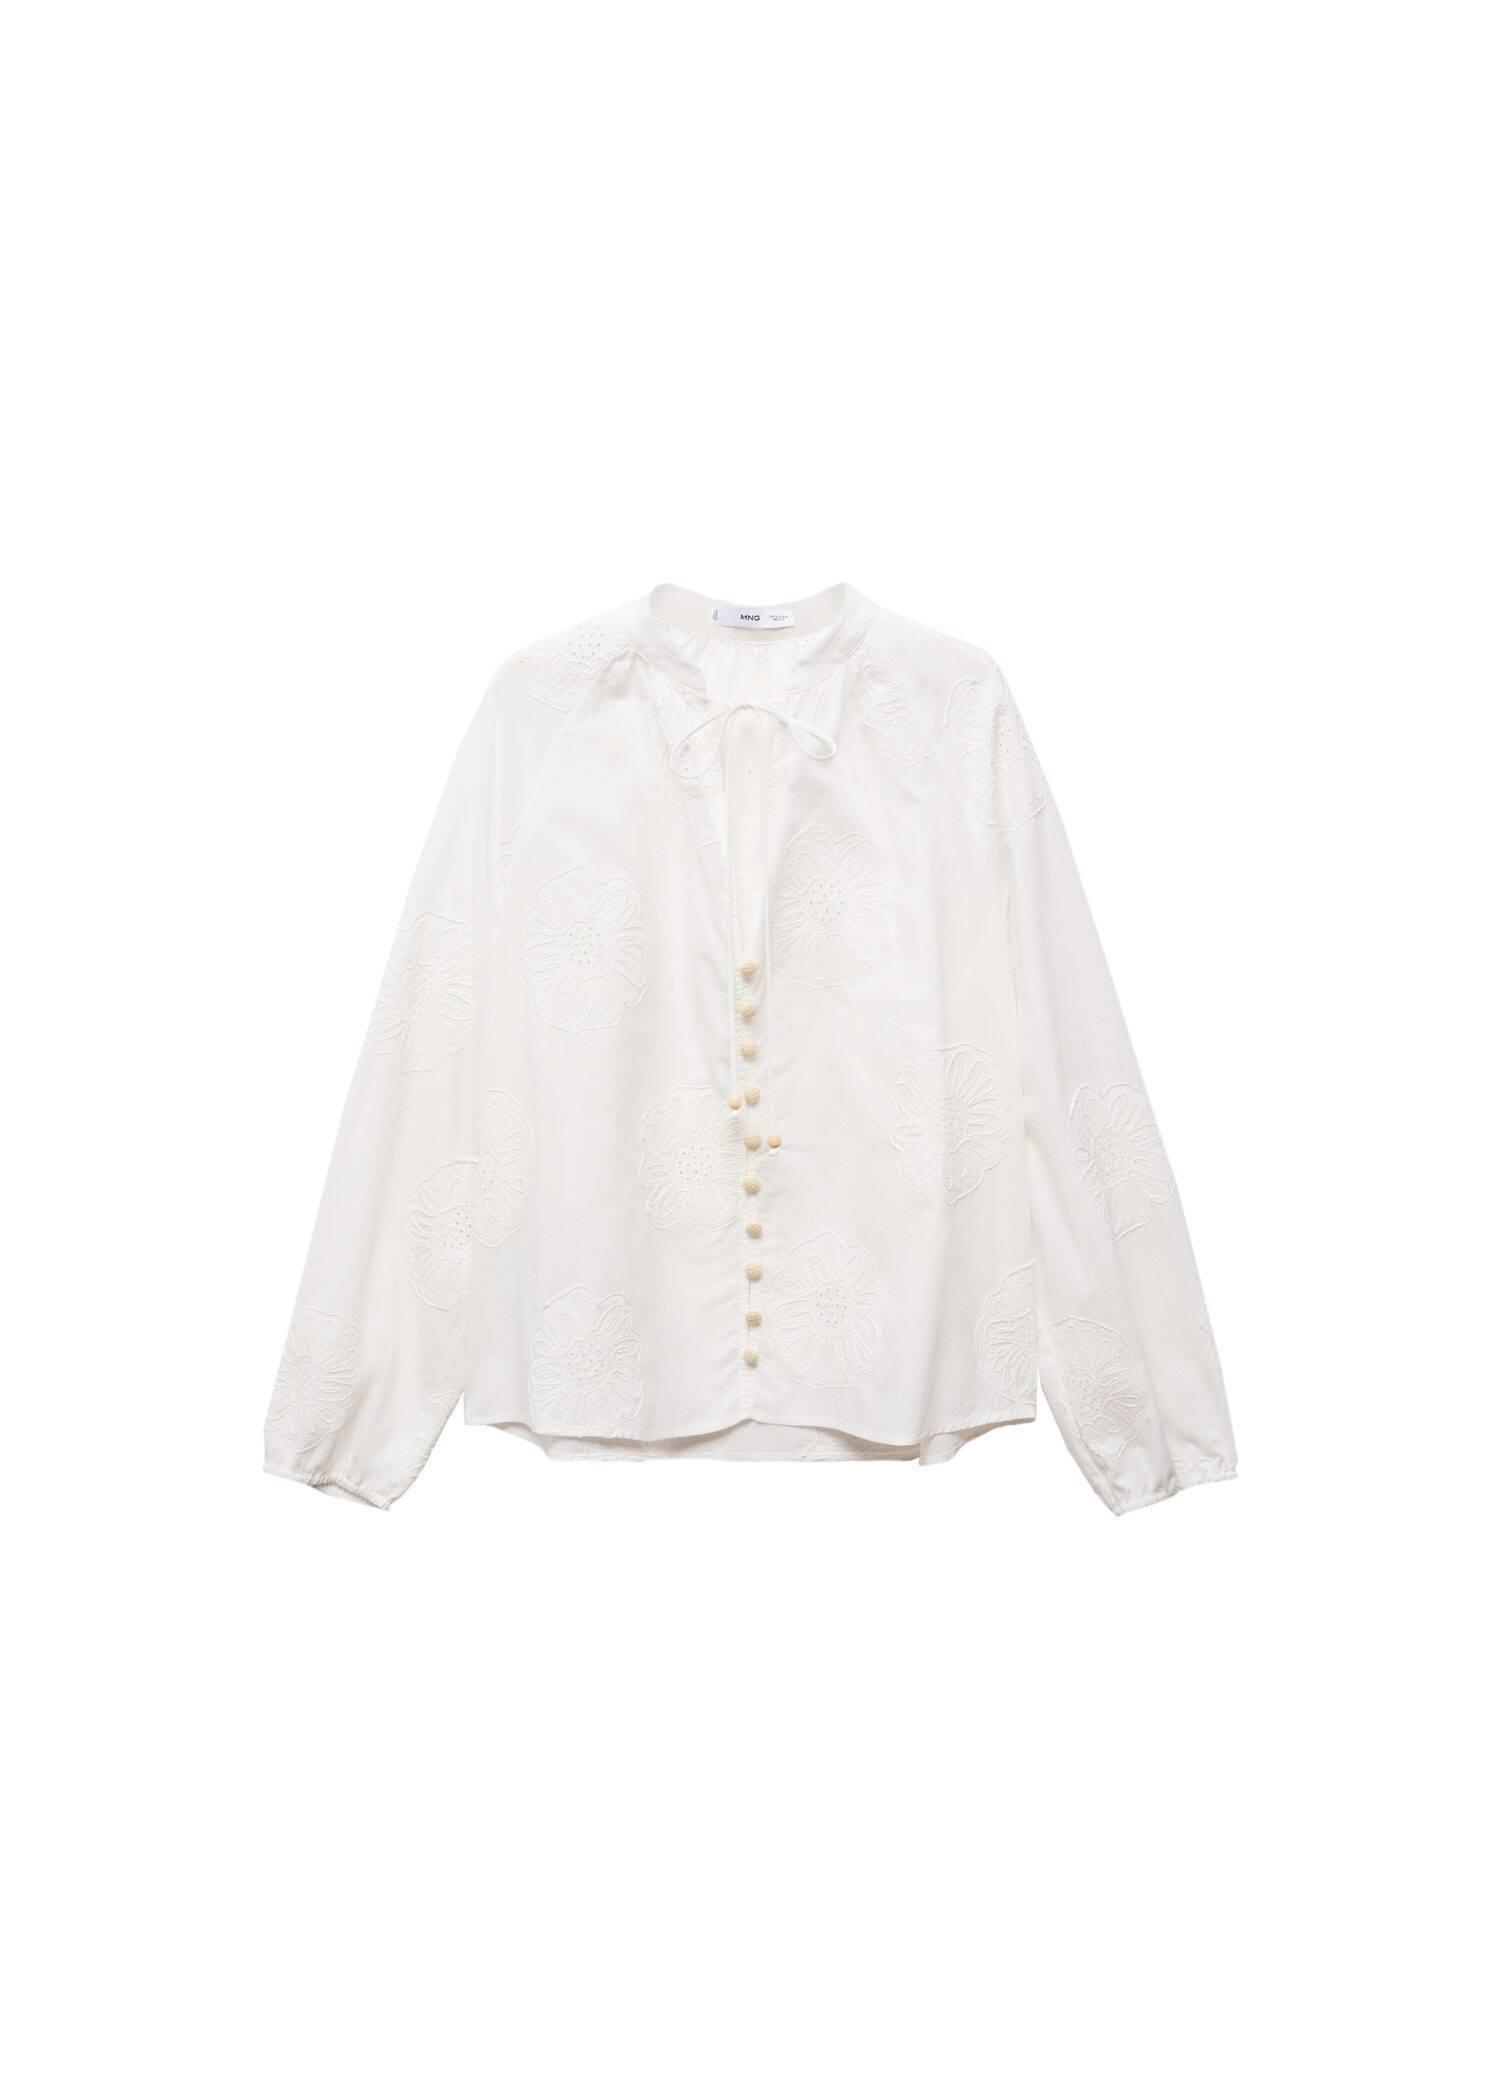 Mango - White Floral Embroidered Blouse With Bow